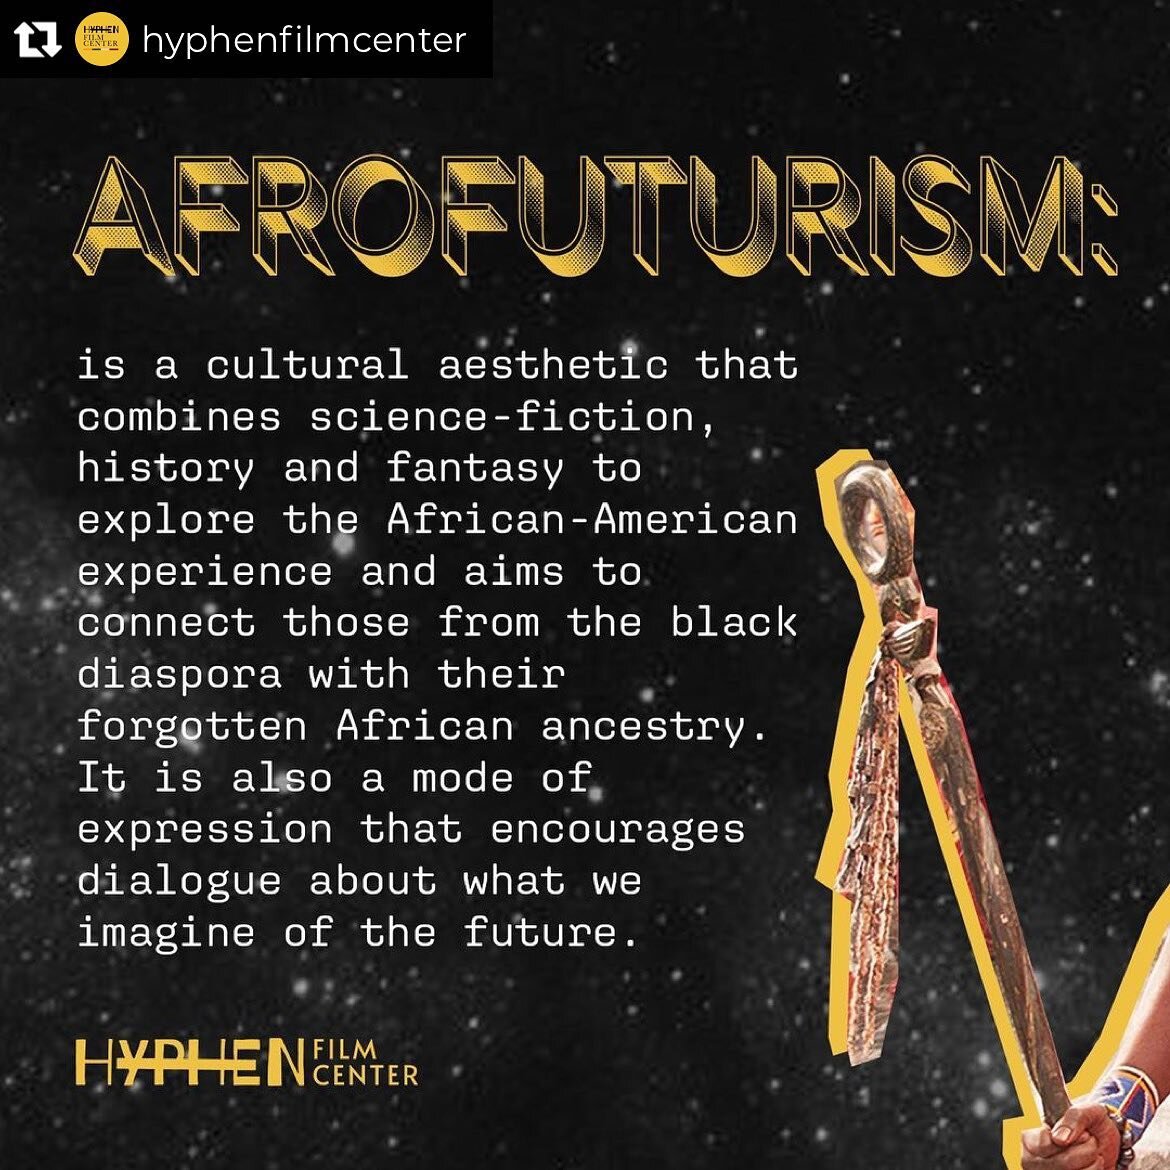 Join us for Logan Under Lights this Saturday featuring curated short films by community partner Hyphen Film Center kicking off their Season One with Black Future: A Night of Aftofuturism.  Music starts at 6:30 with screenings in the GE Kitchen at 7:3